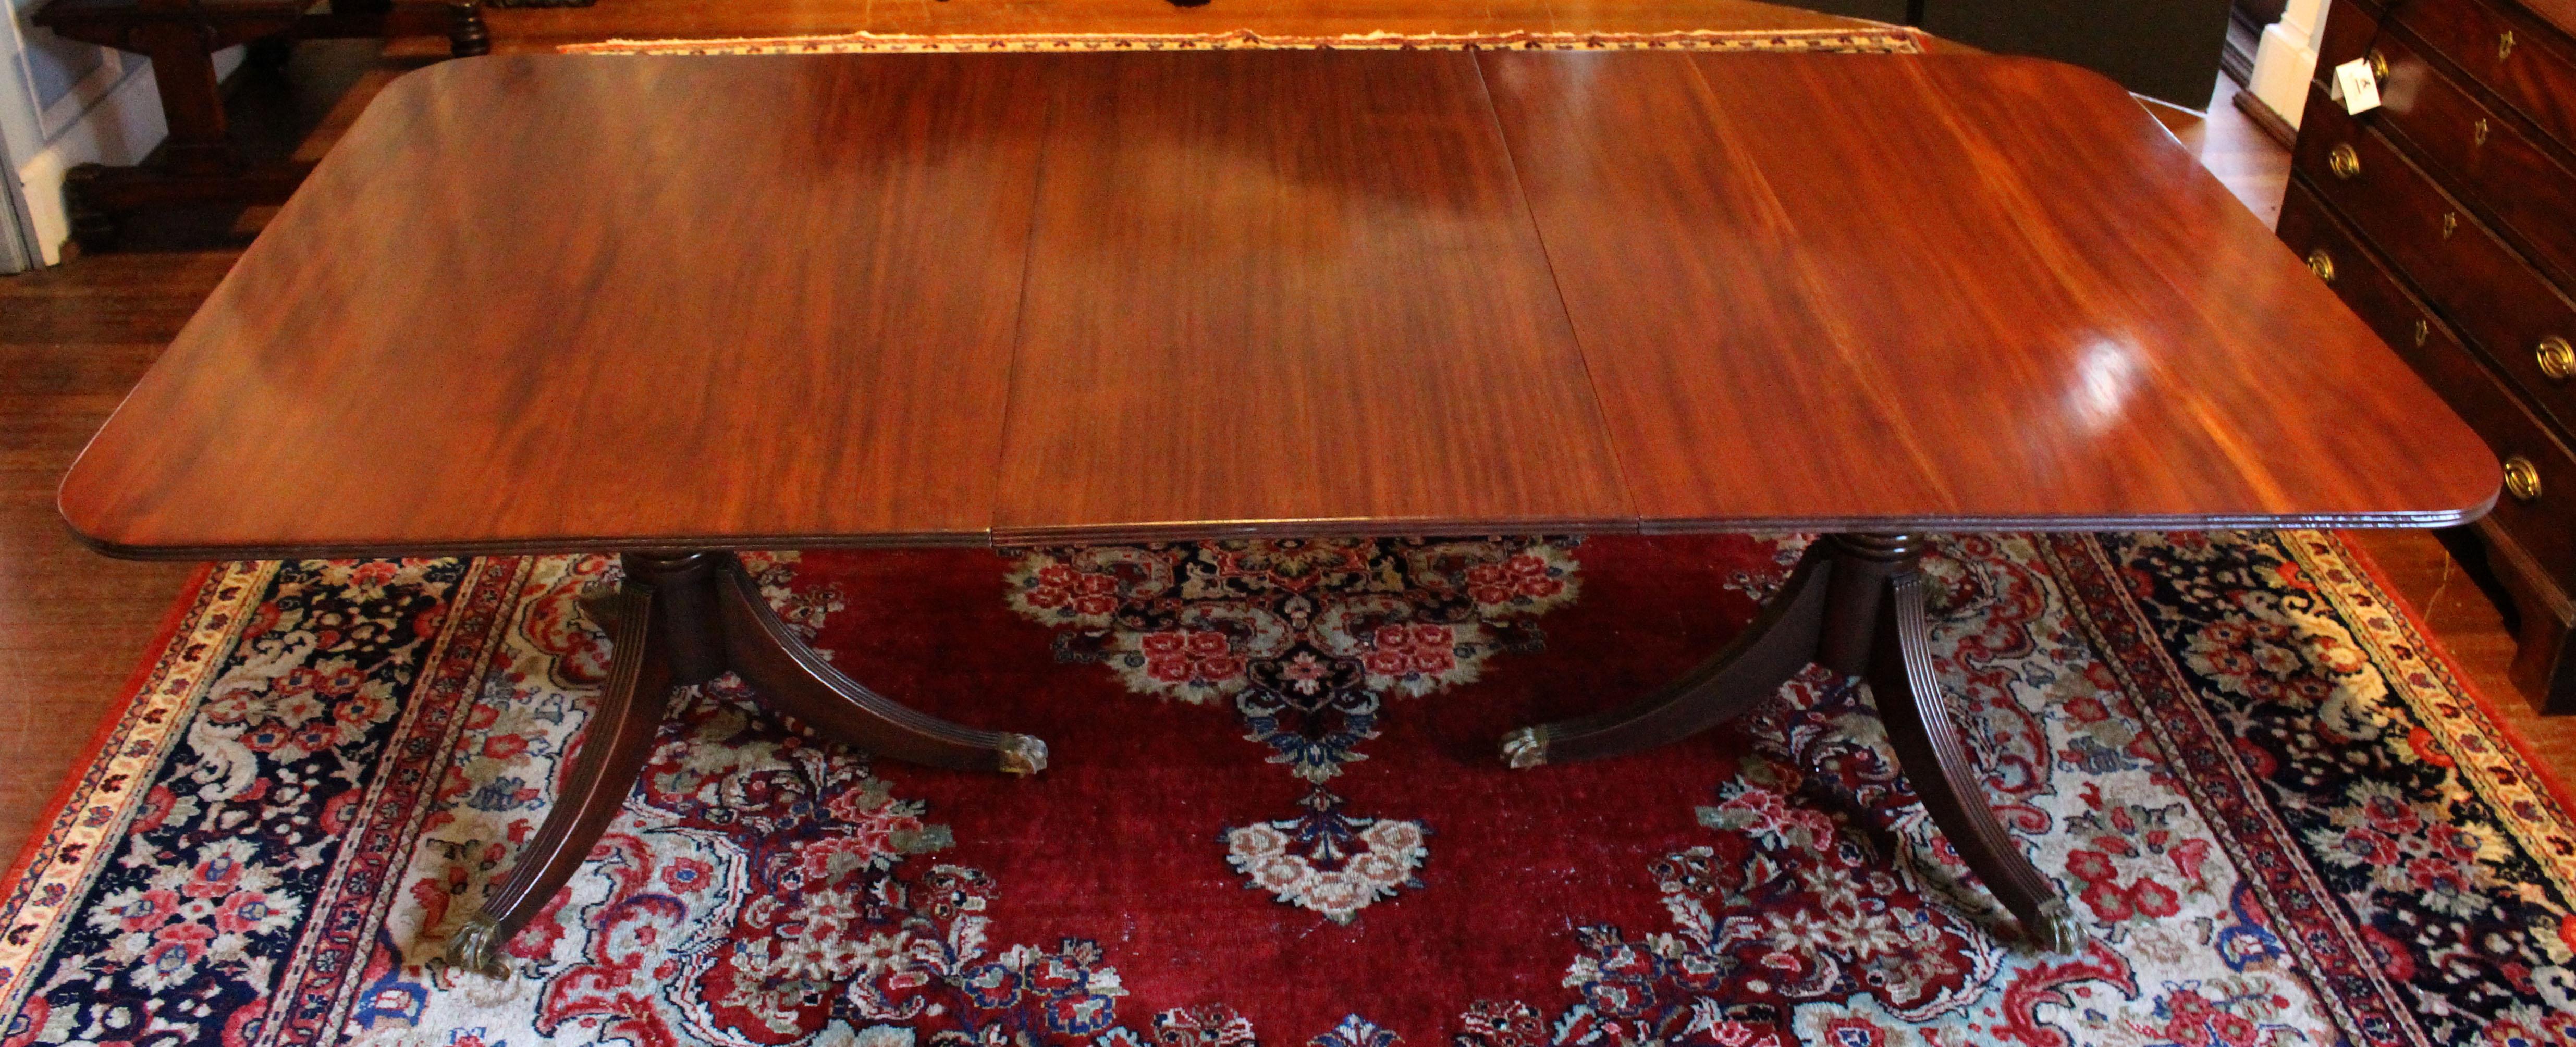 19th Century English c. 1835 William IV Period Dining Table For Sale